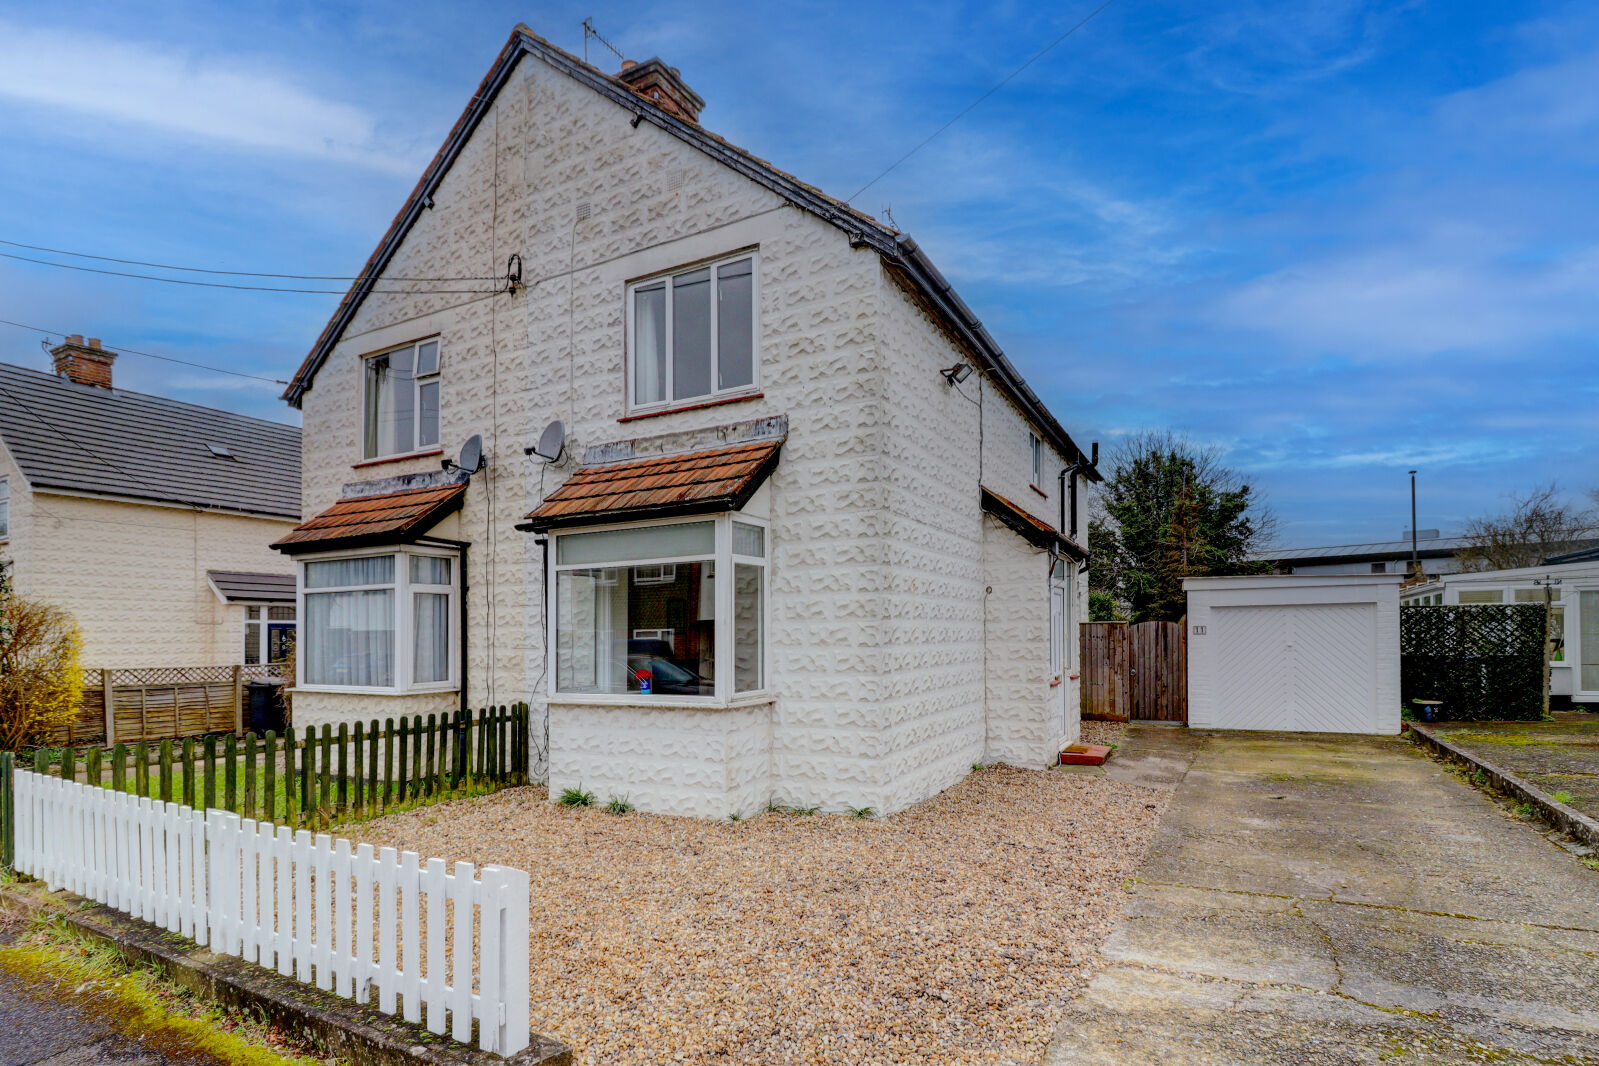 3 bedroom semi detached house for sale Old Forge Road, Loudwater, HP10, main image